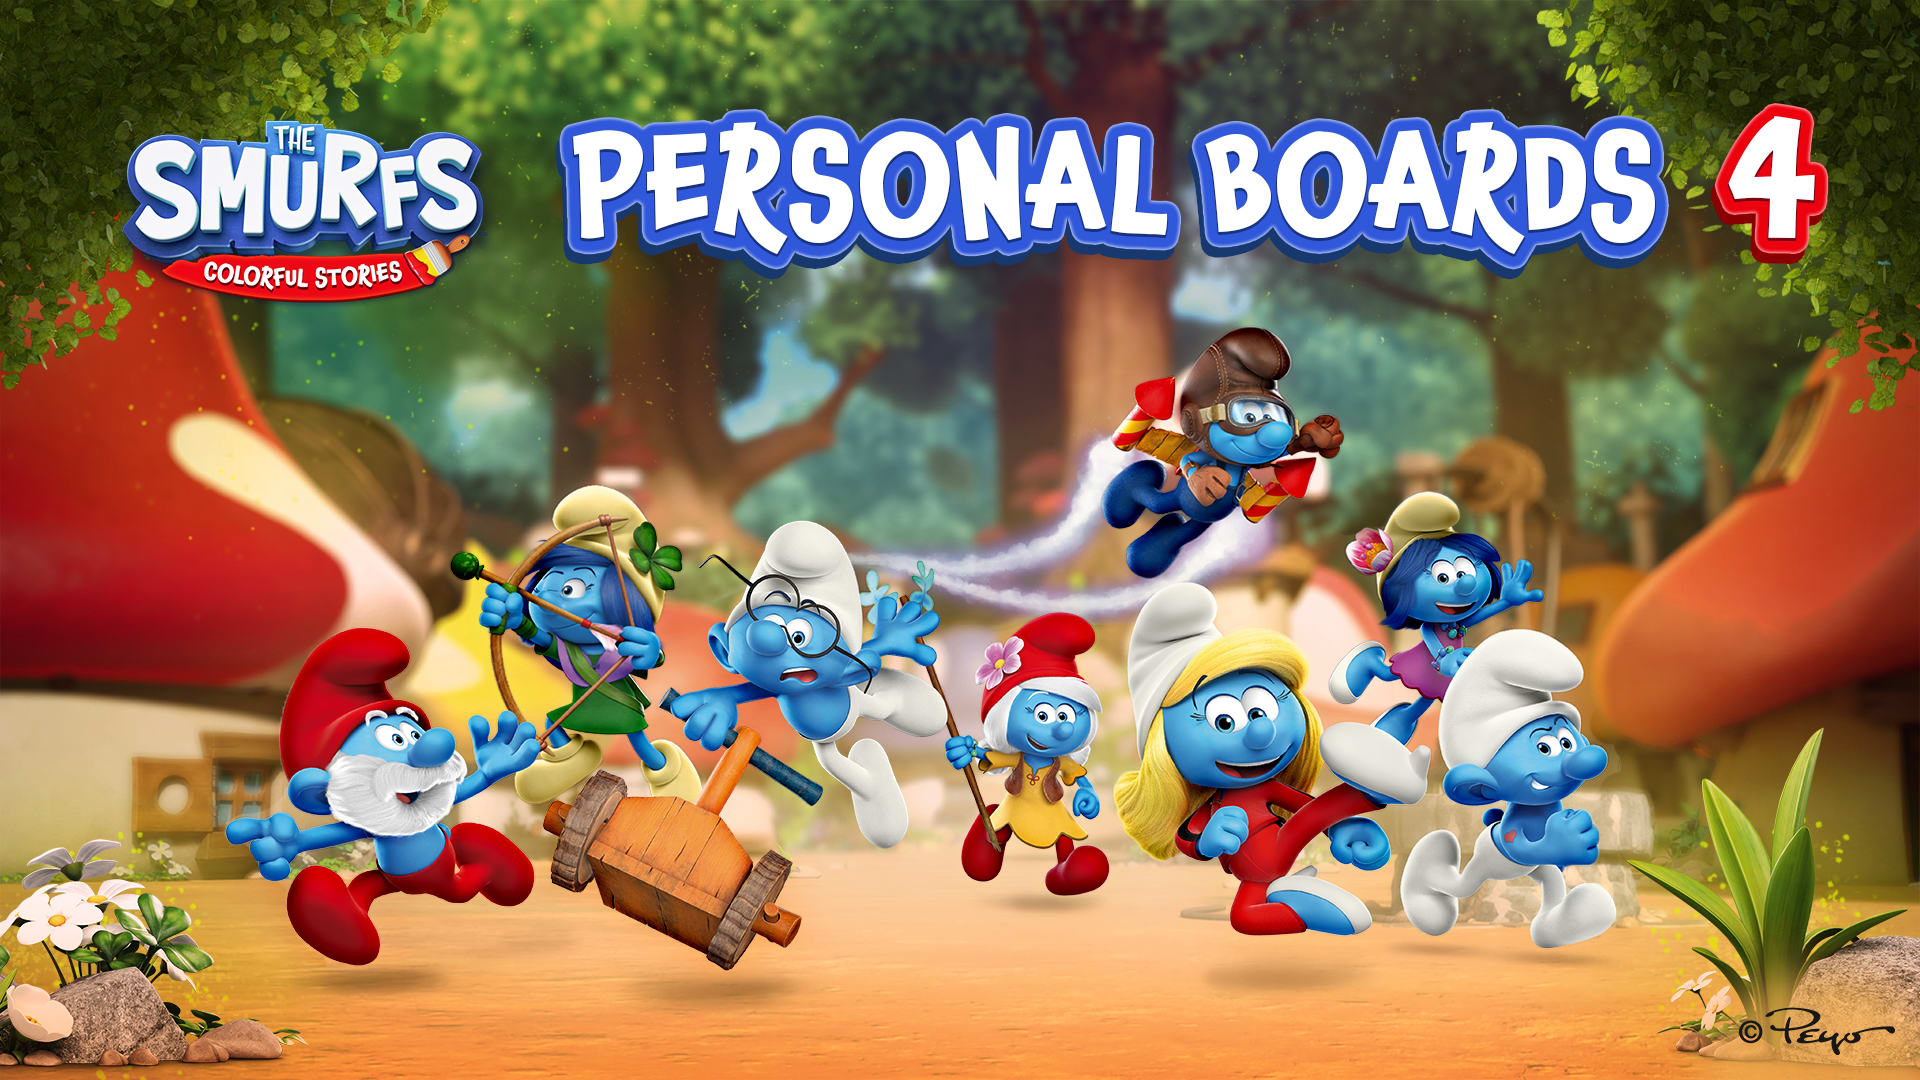 Personal Boards 4